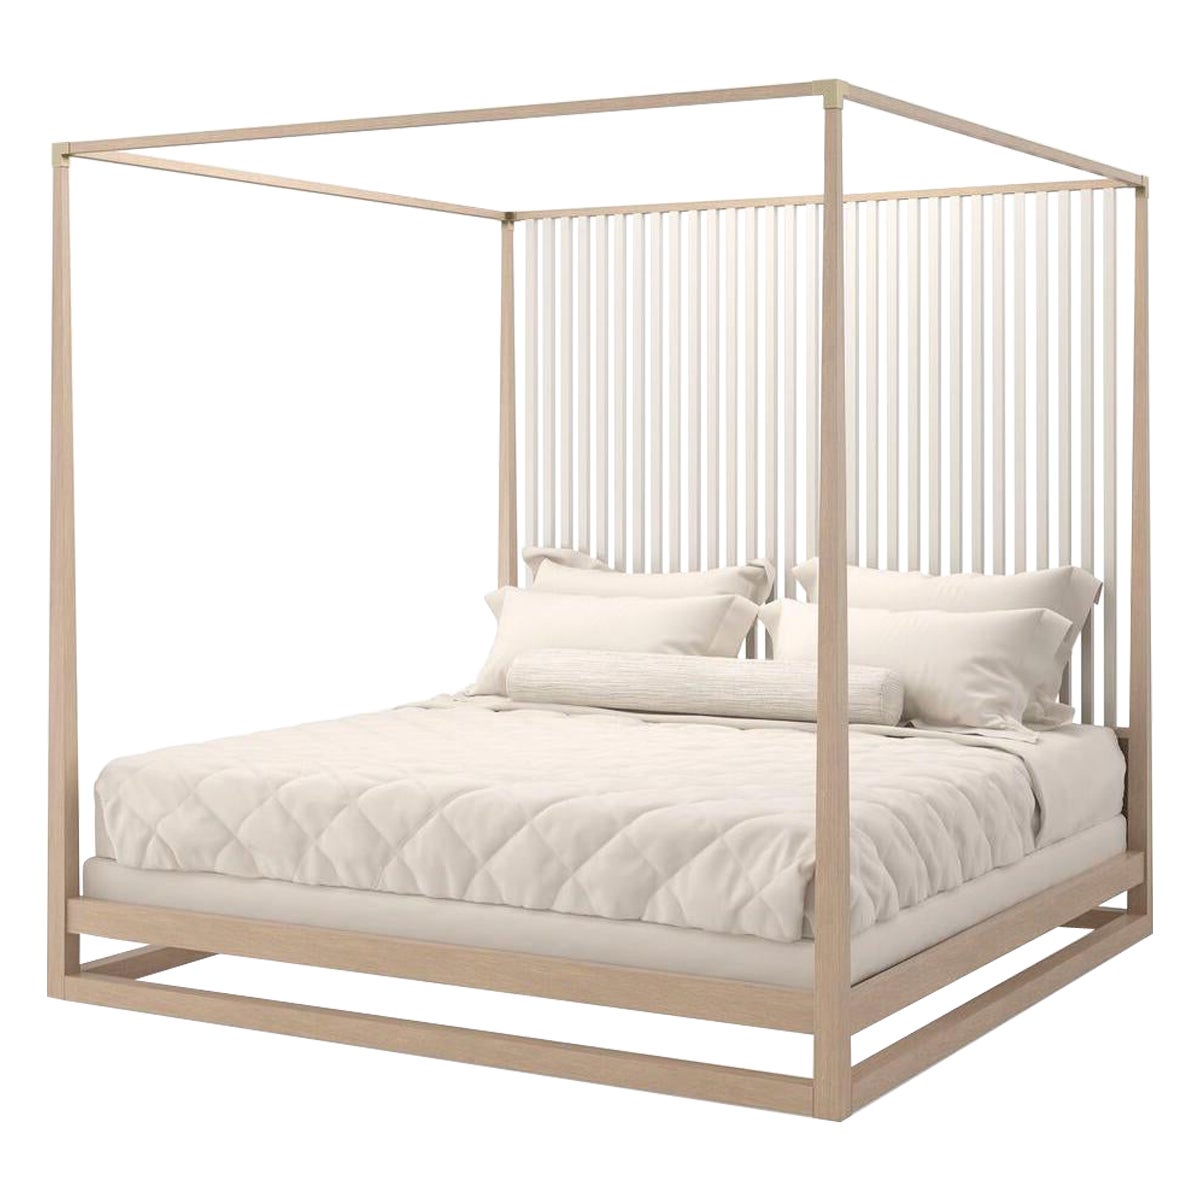 Light Mid Century Canopy Bed - Queen For Sale